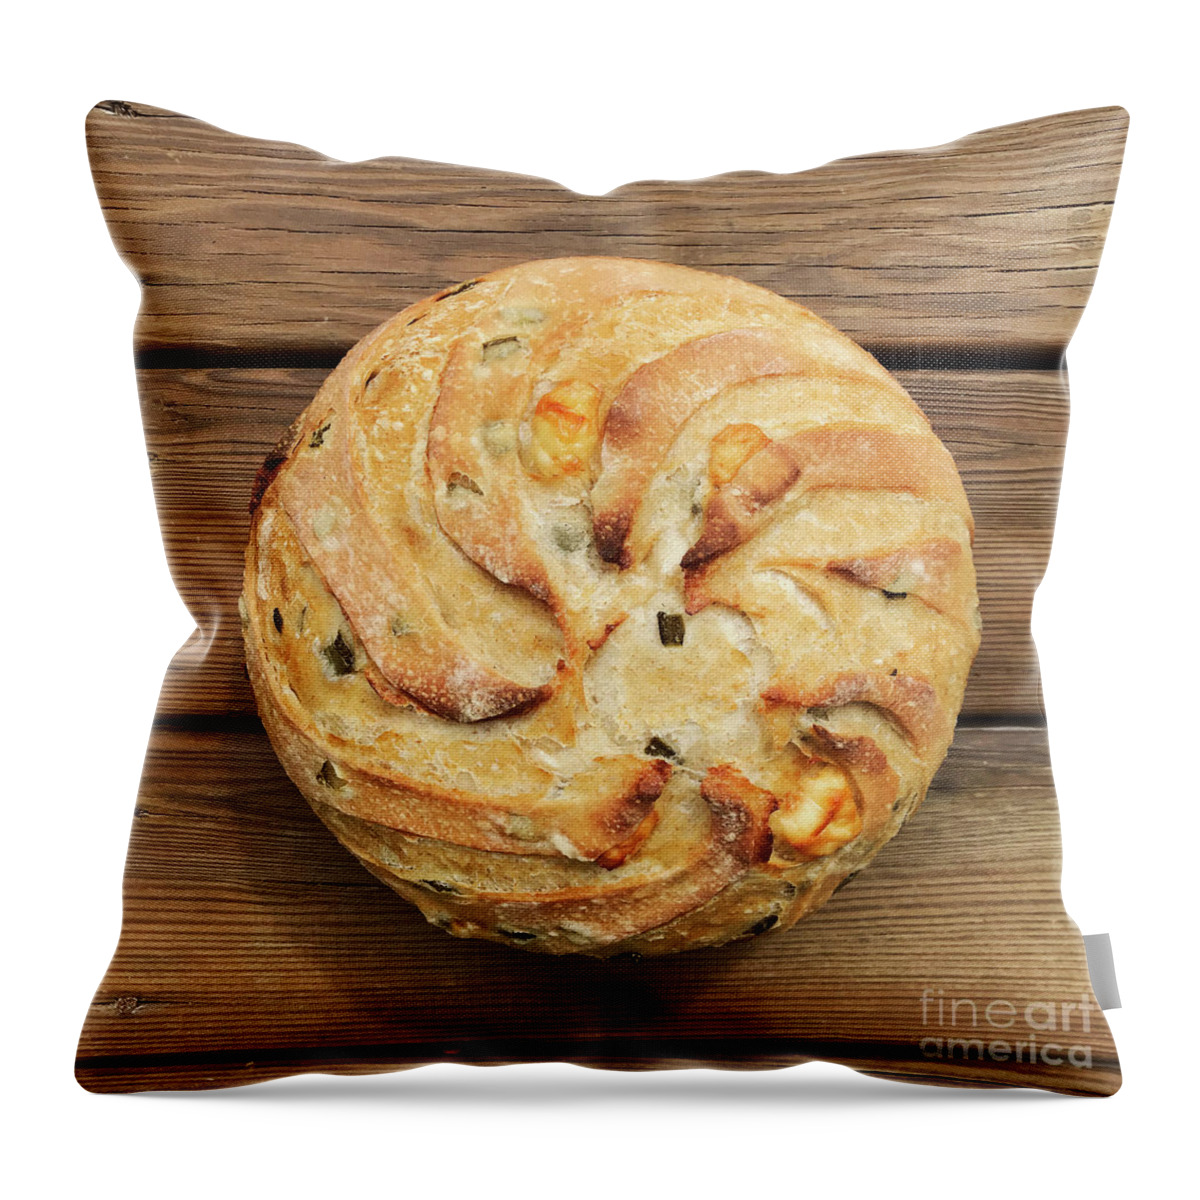 Bread Throw Pillow featuring the photograph Jalapeno Cheddar Sourdough by Amy E Fraser